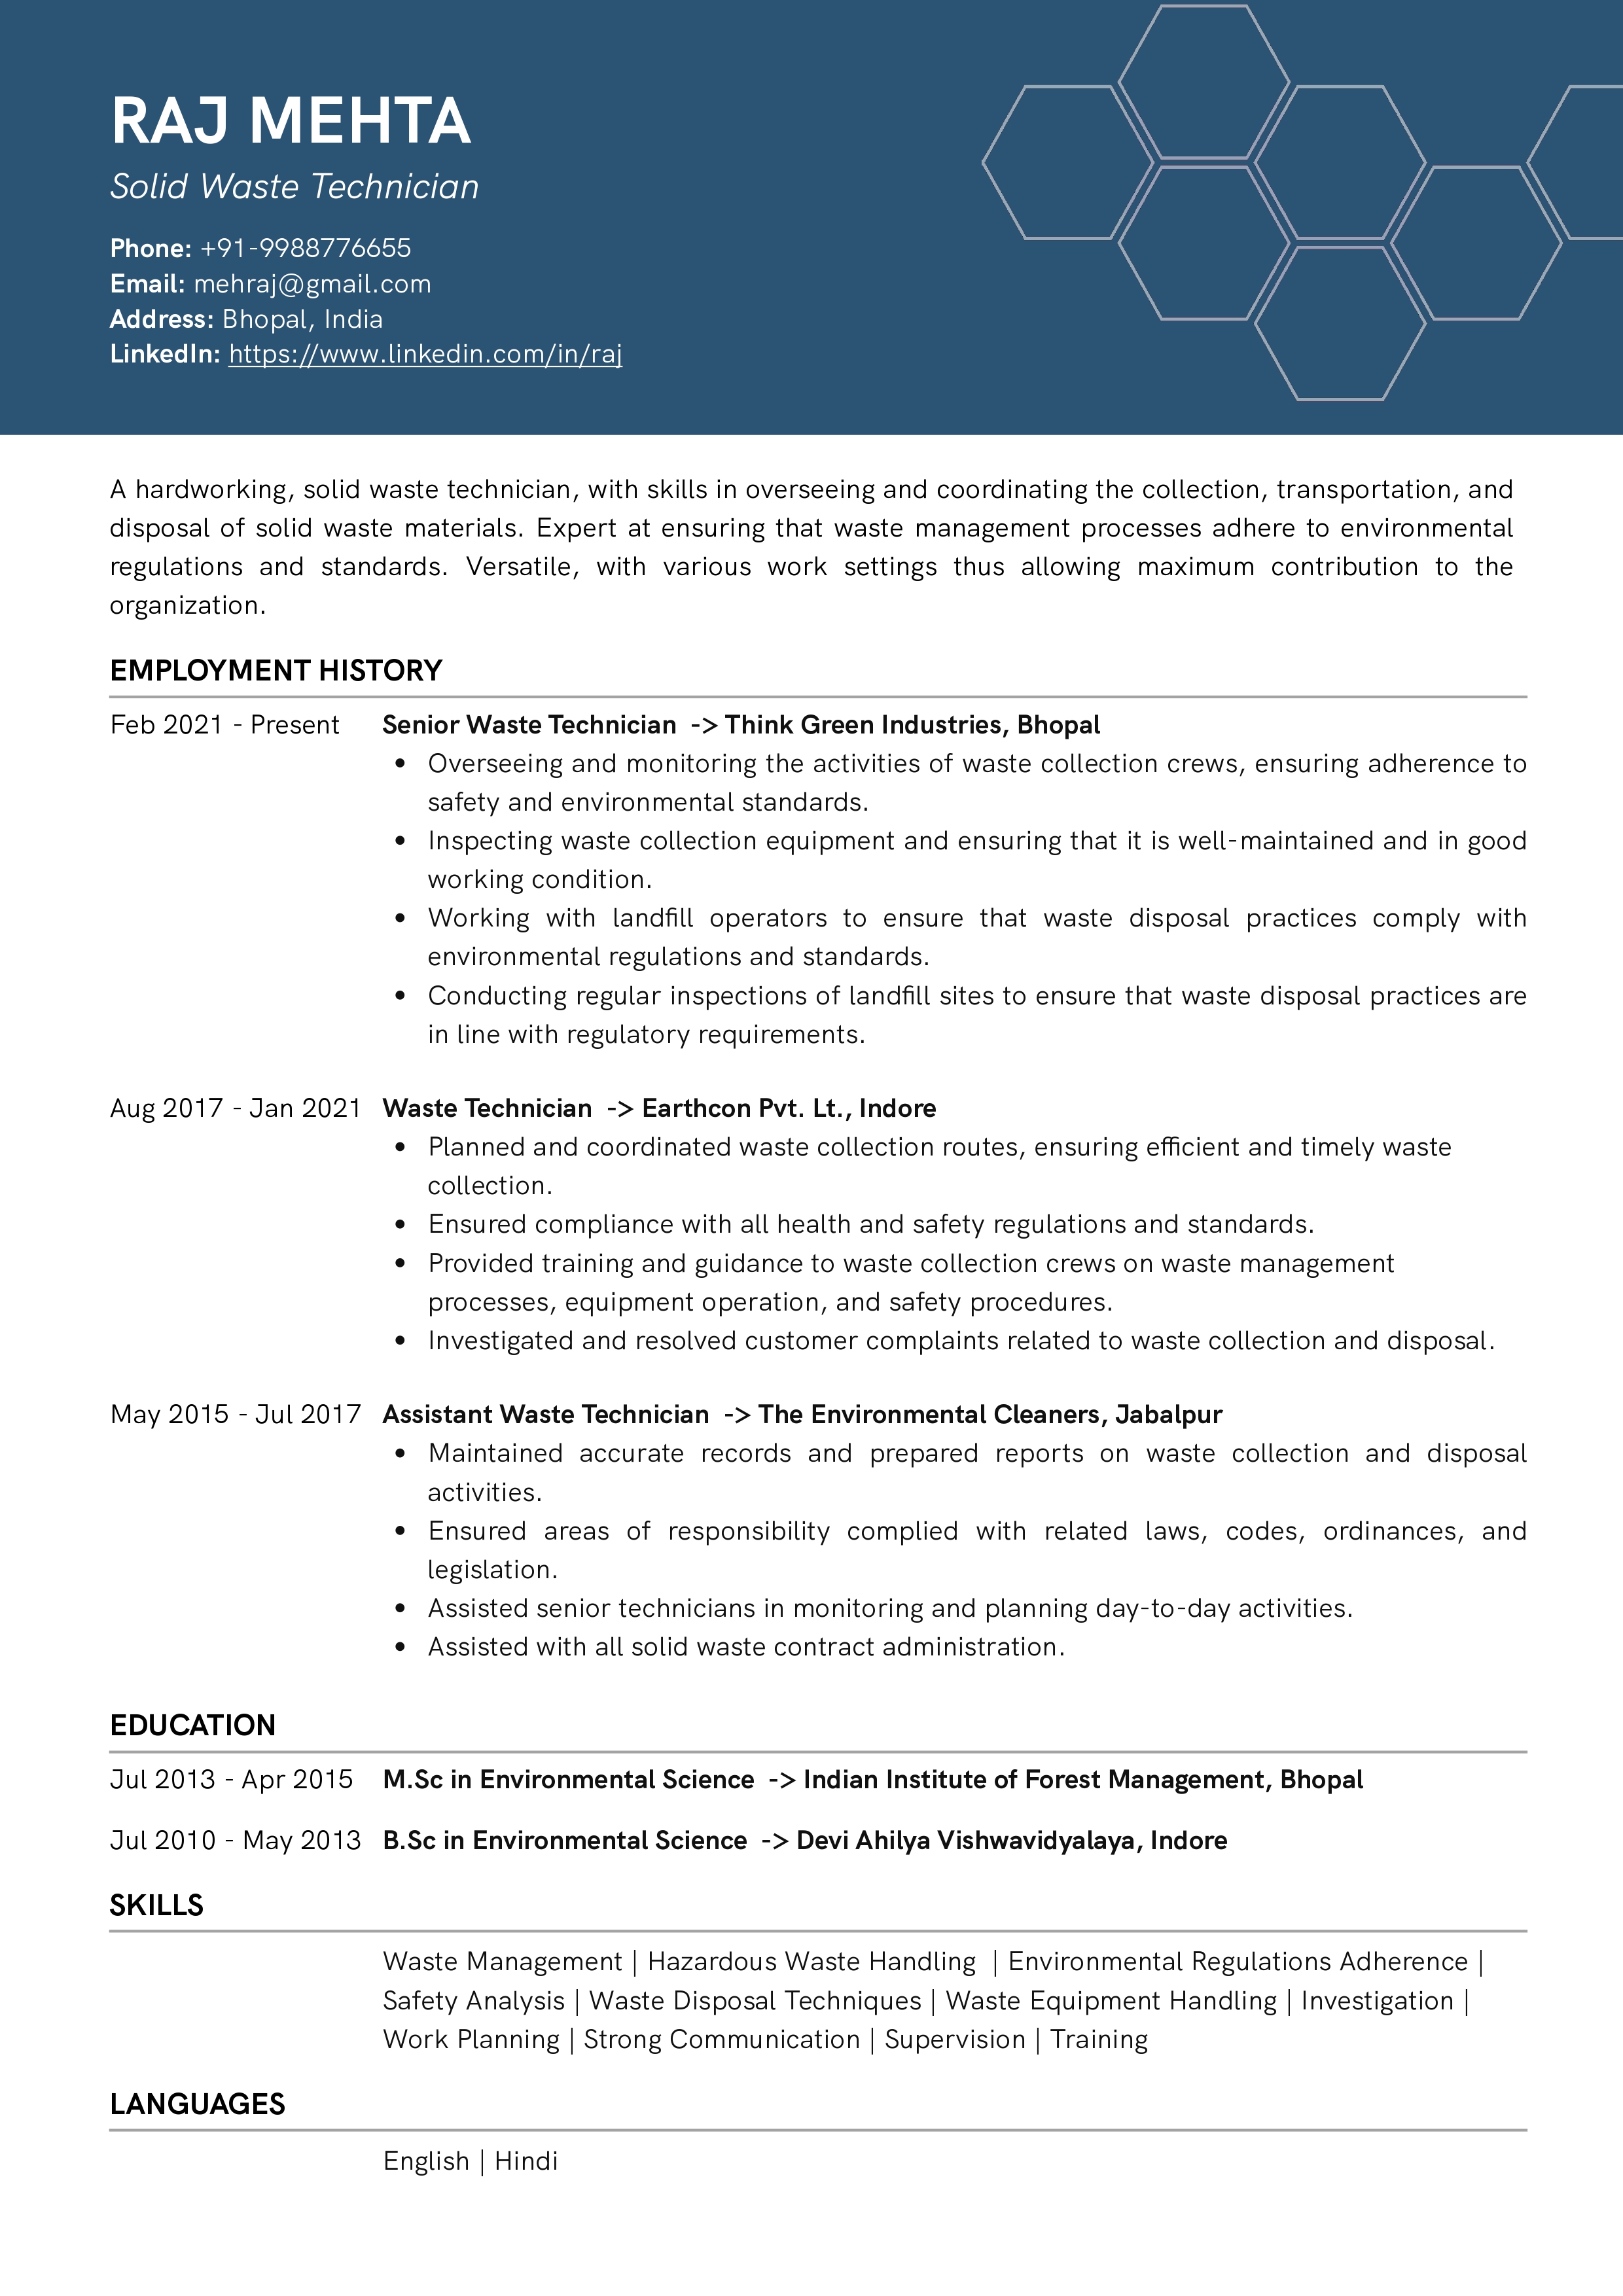 Sample Resume of Solid Waste Technician | Free Resume Templates & Samples on Resumod.co